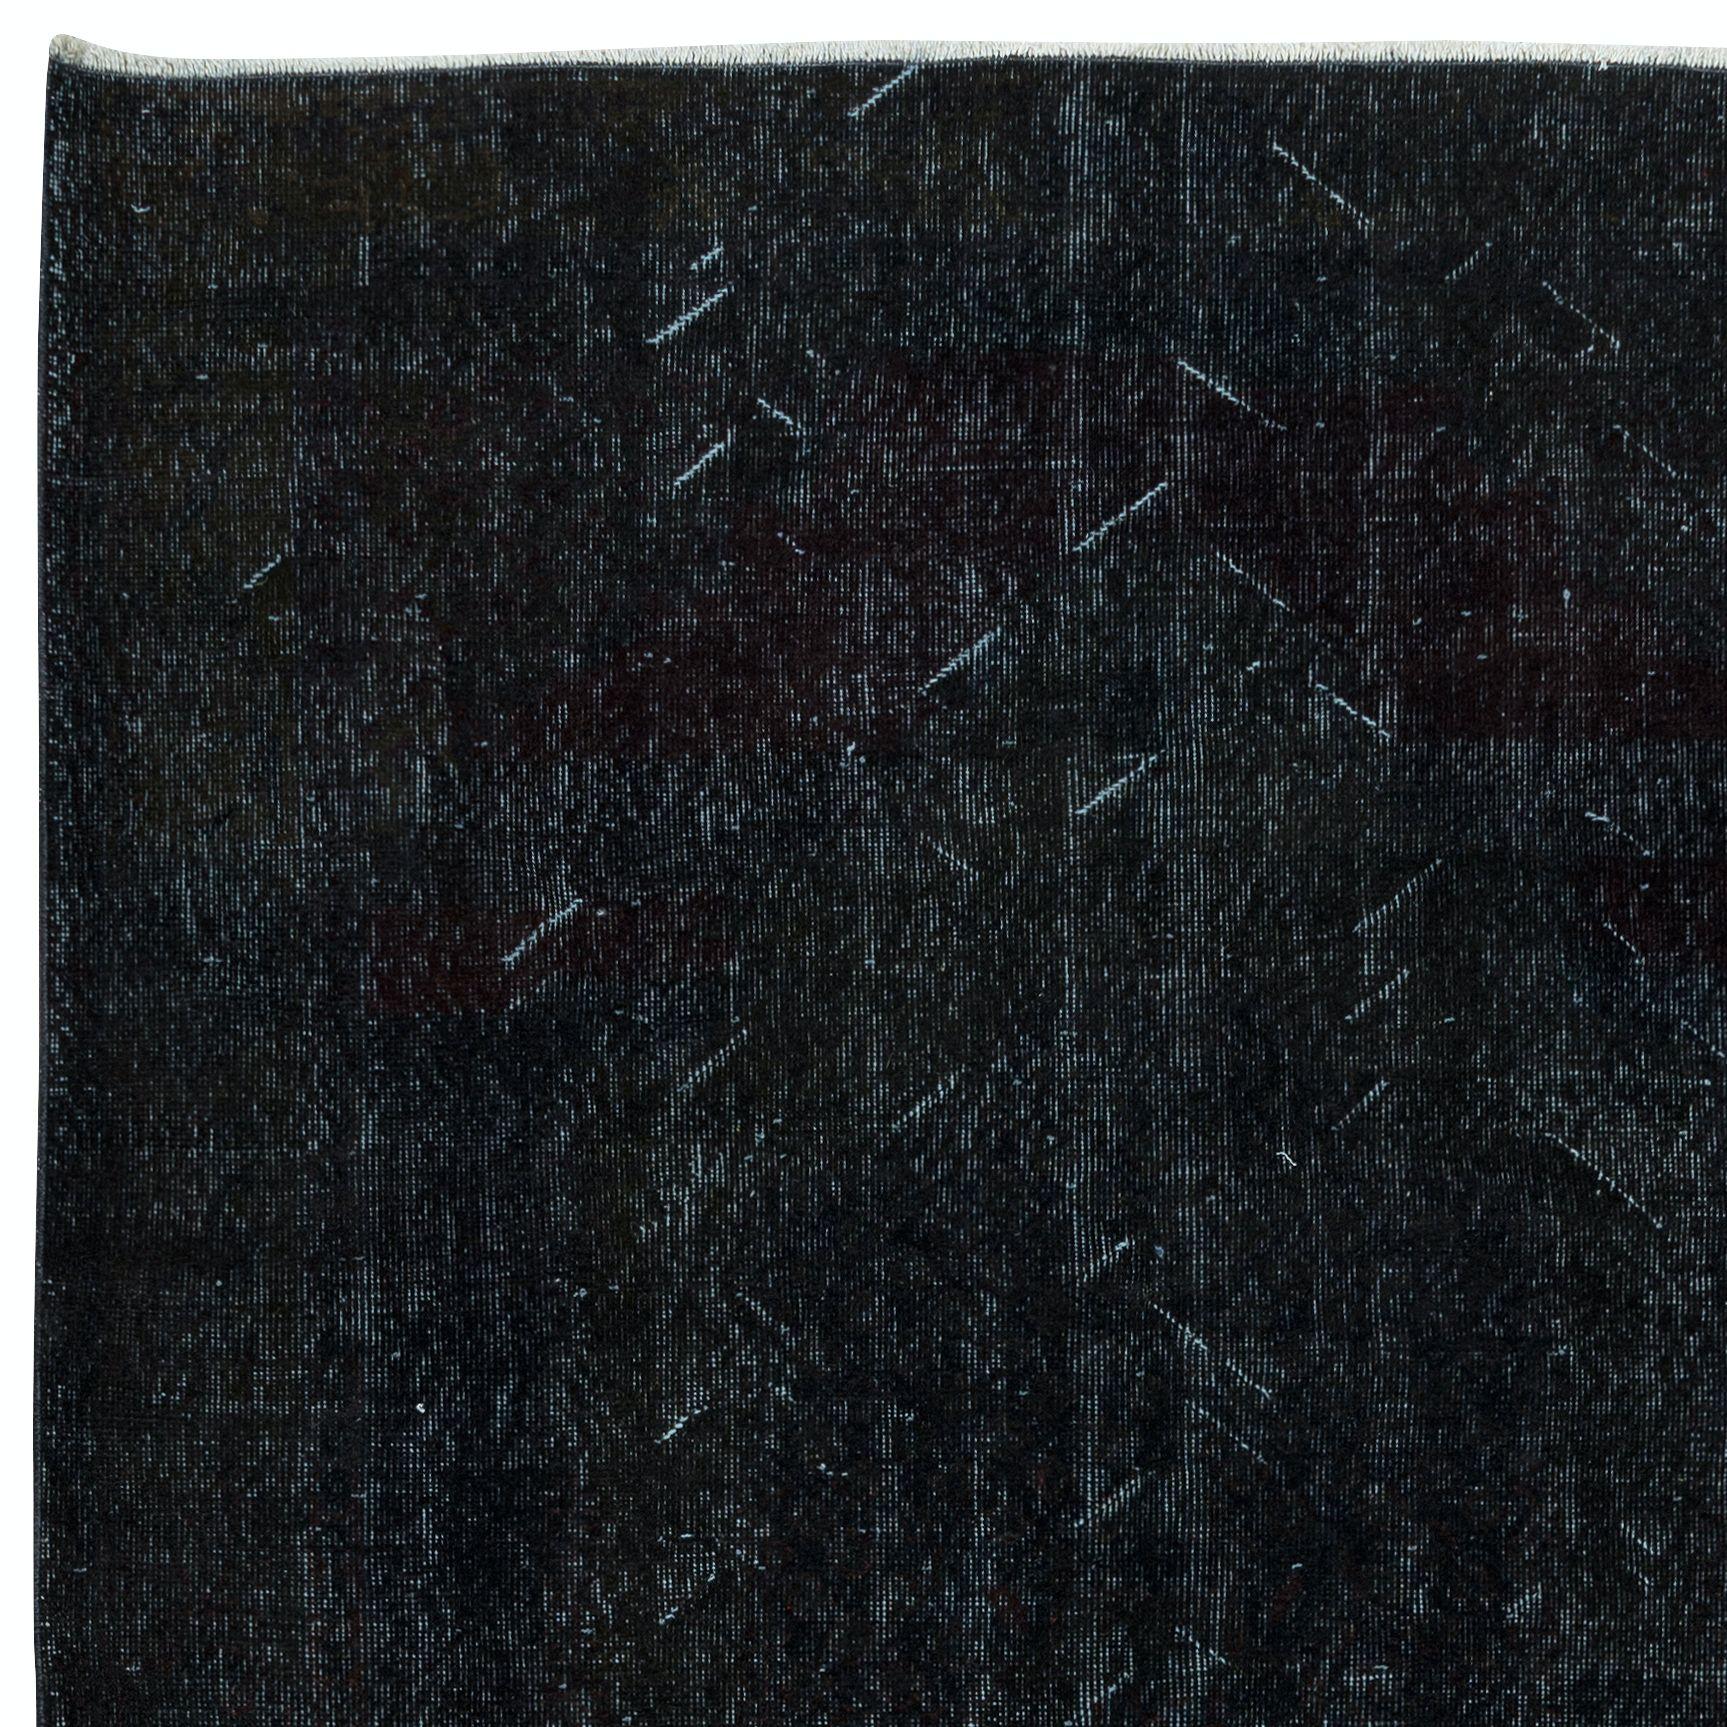 Hand-Woven 5.6x9 Ft Modern Black Area Rug made of wool and cotton, Hand-Knotted in Turkey For Sale